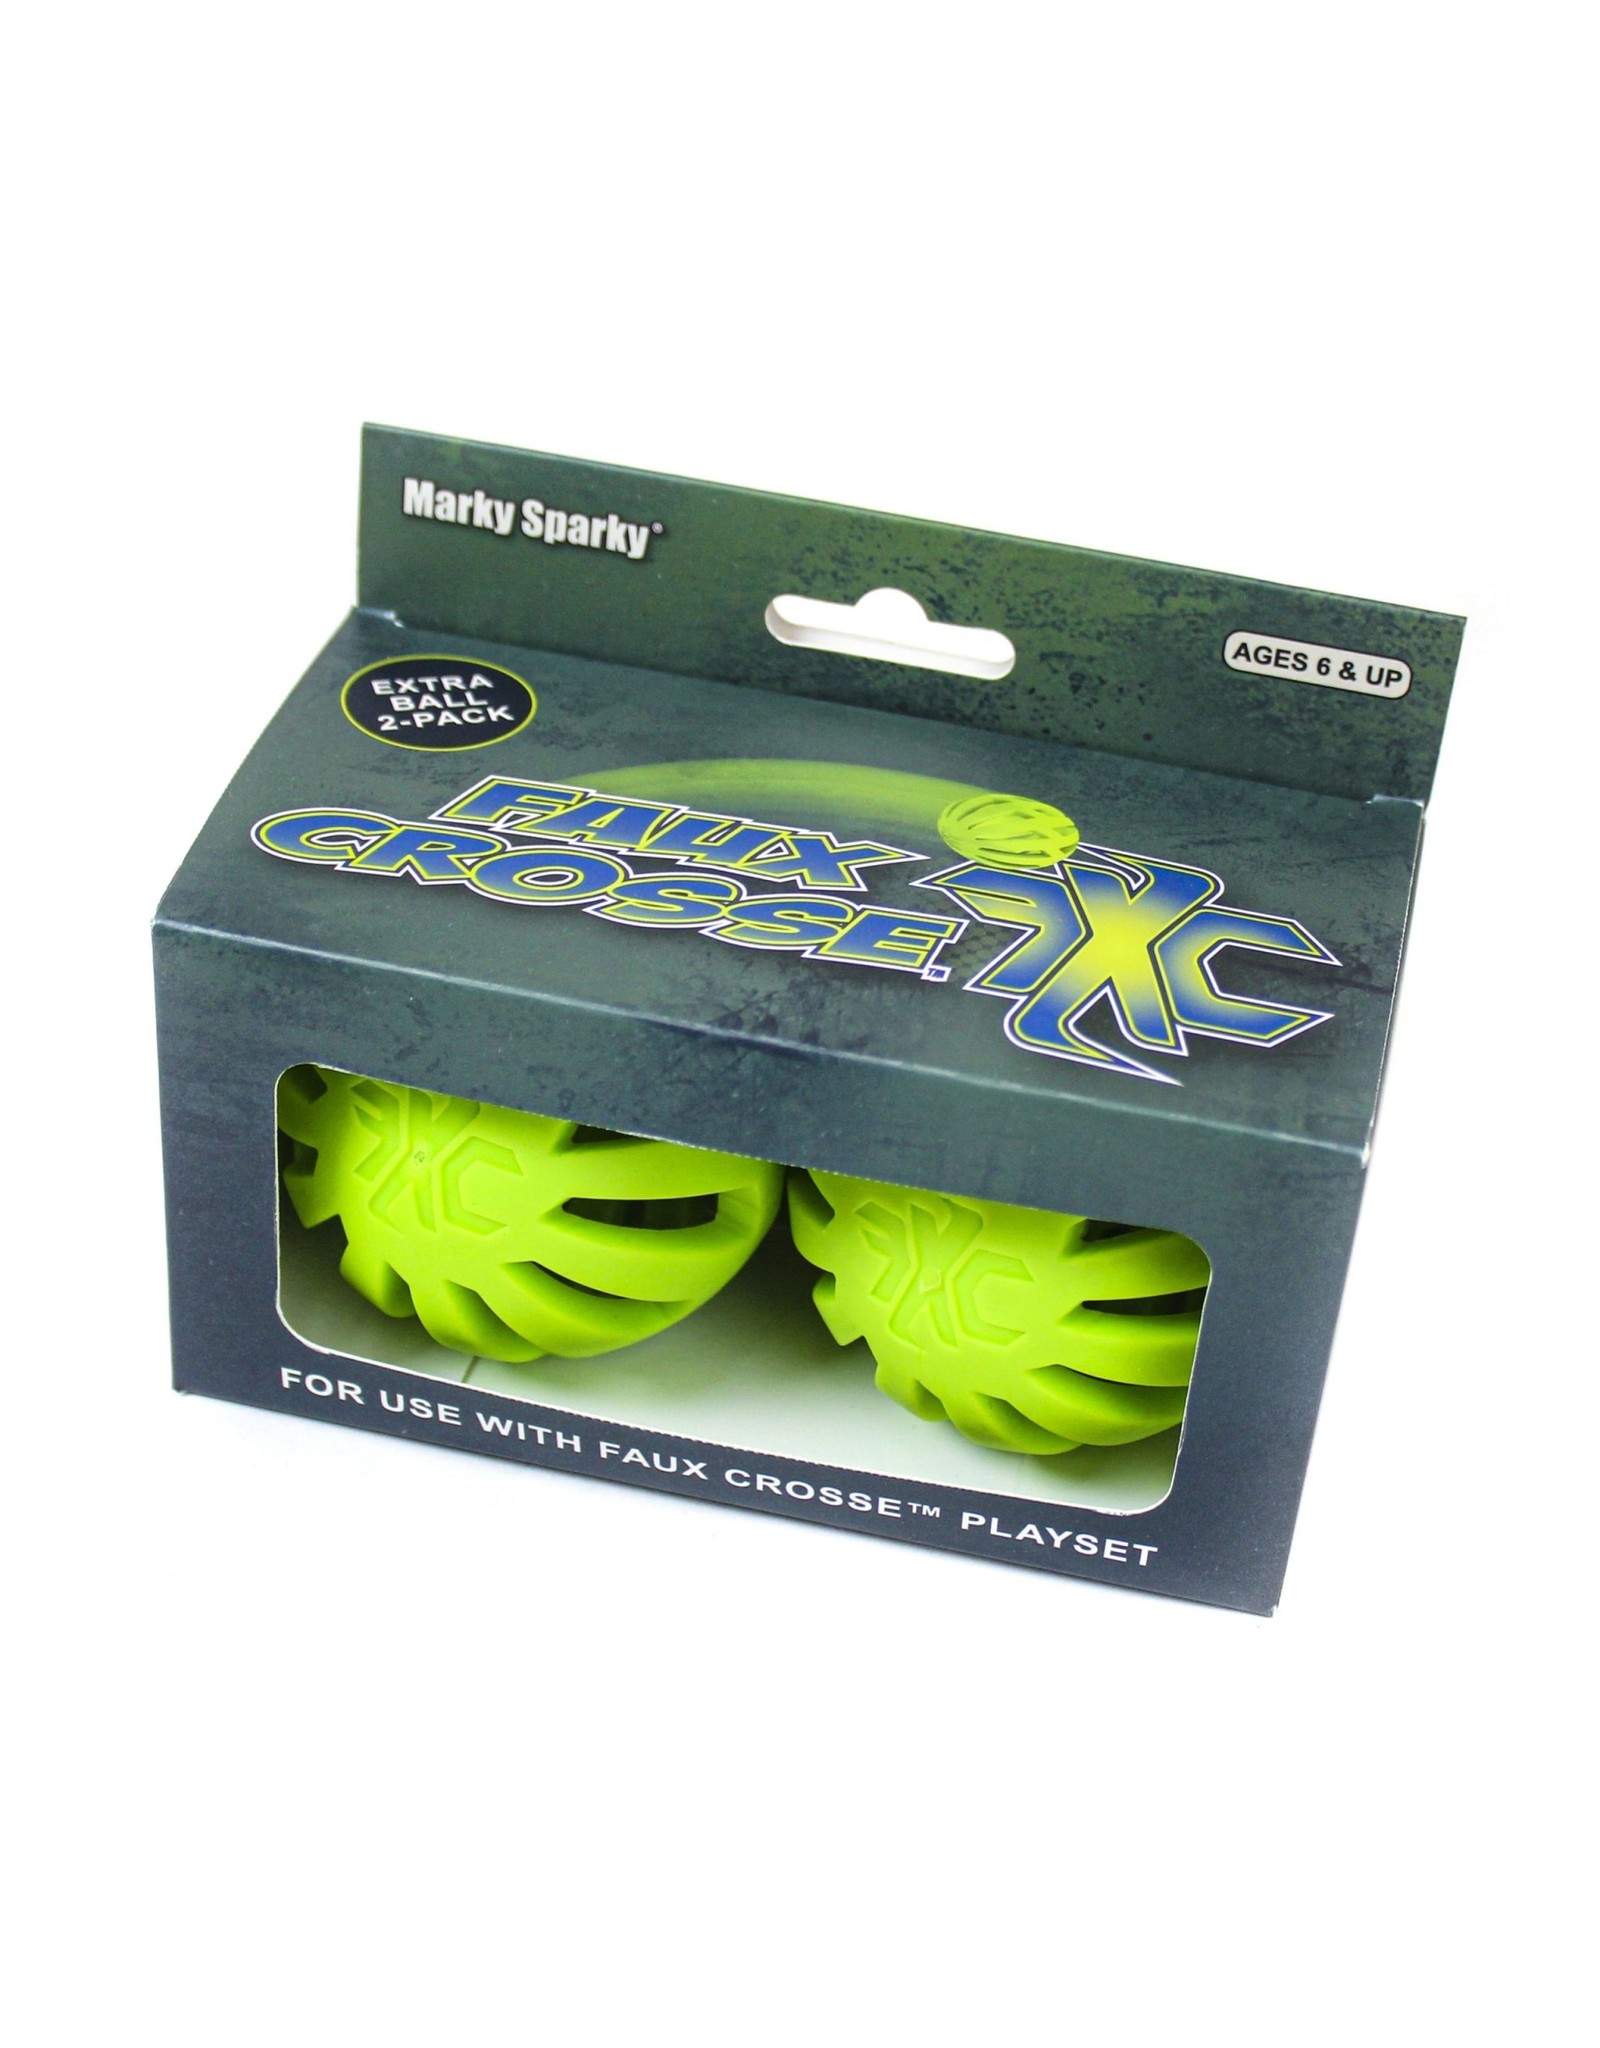 Faux Crosse Ball 2 Pack